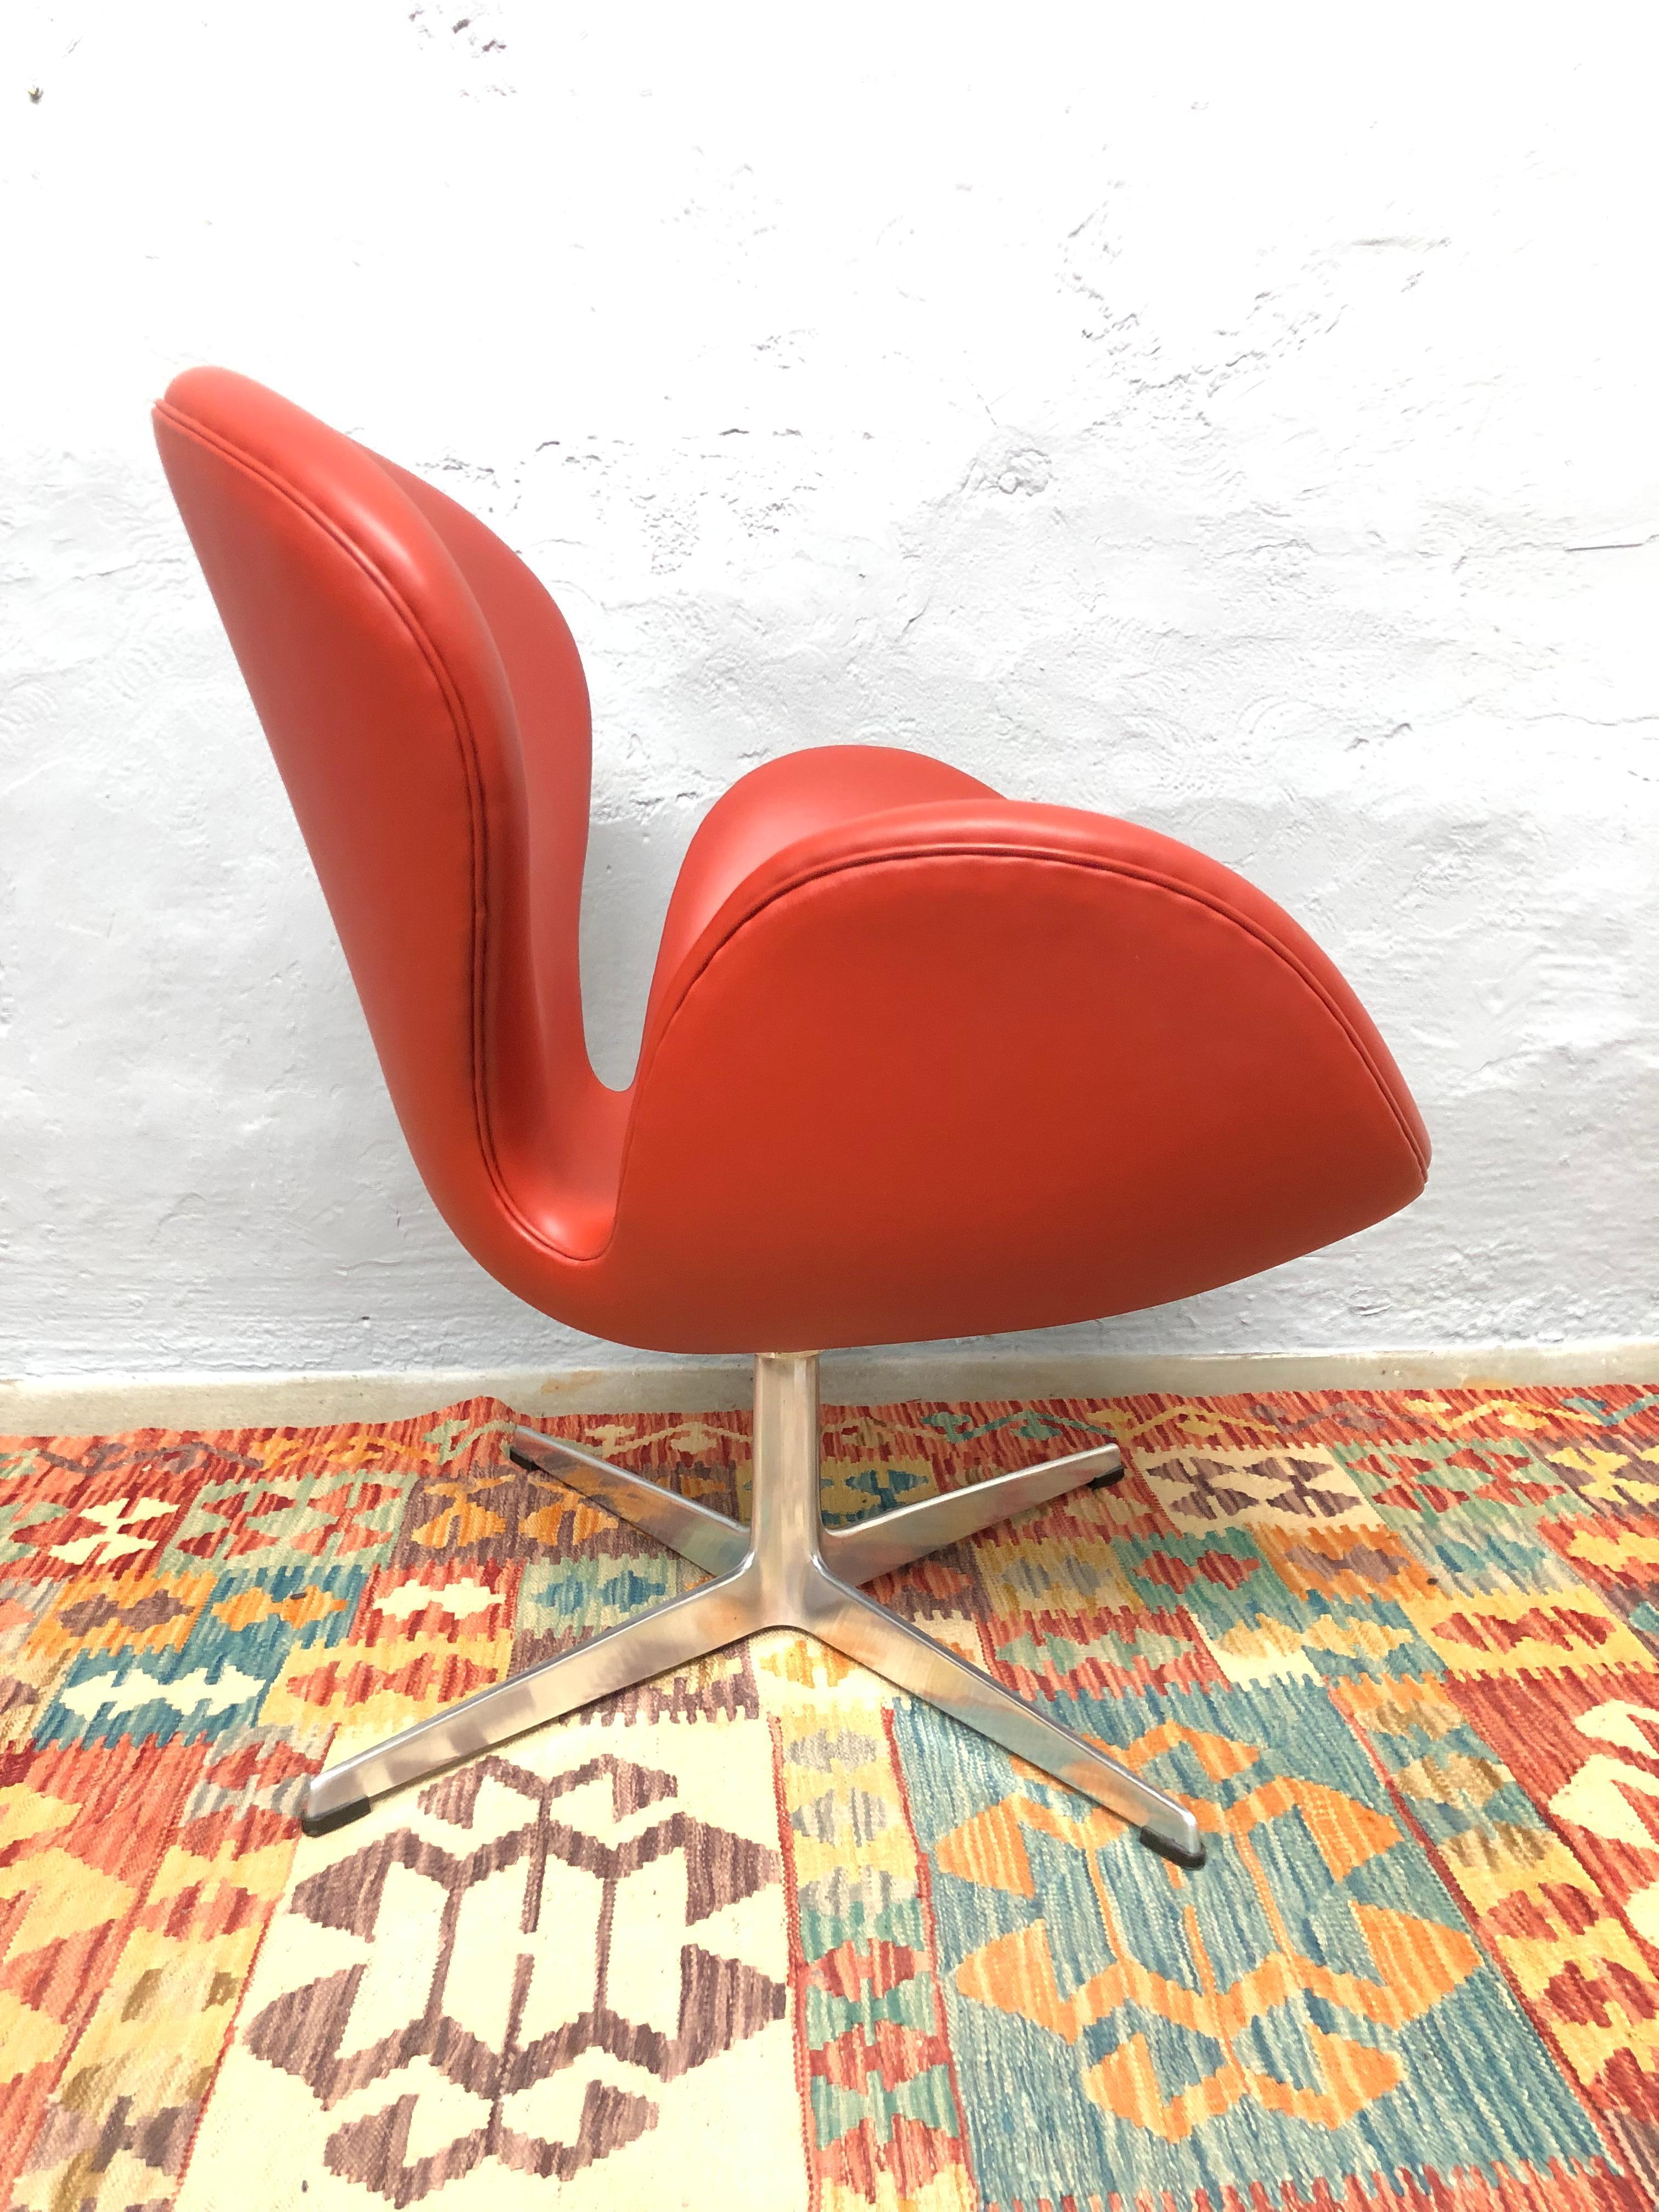 Vintage Iconic First Edition Arne Jacobsen 3320 Lounge Chair Designed in 1958 7